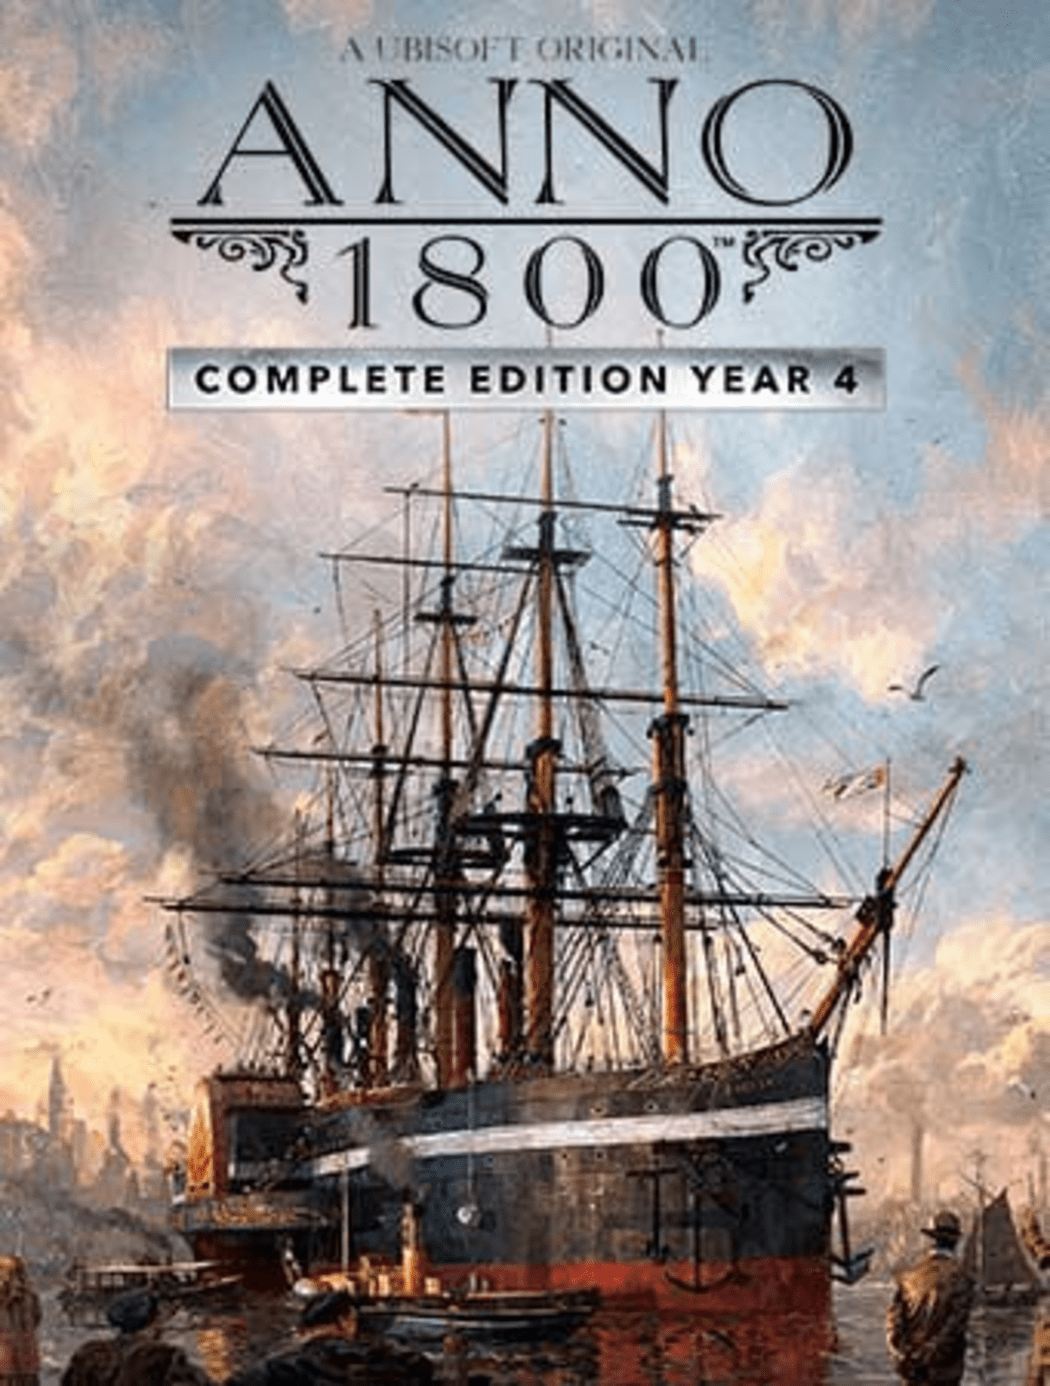 Anno 1800 Pc Key Buy Anno 1800 Complete Edition Year 4 PC Uplay key! Cheap price | ENEBA